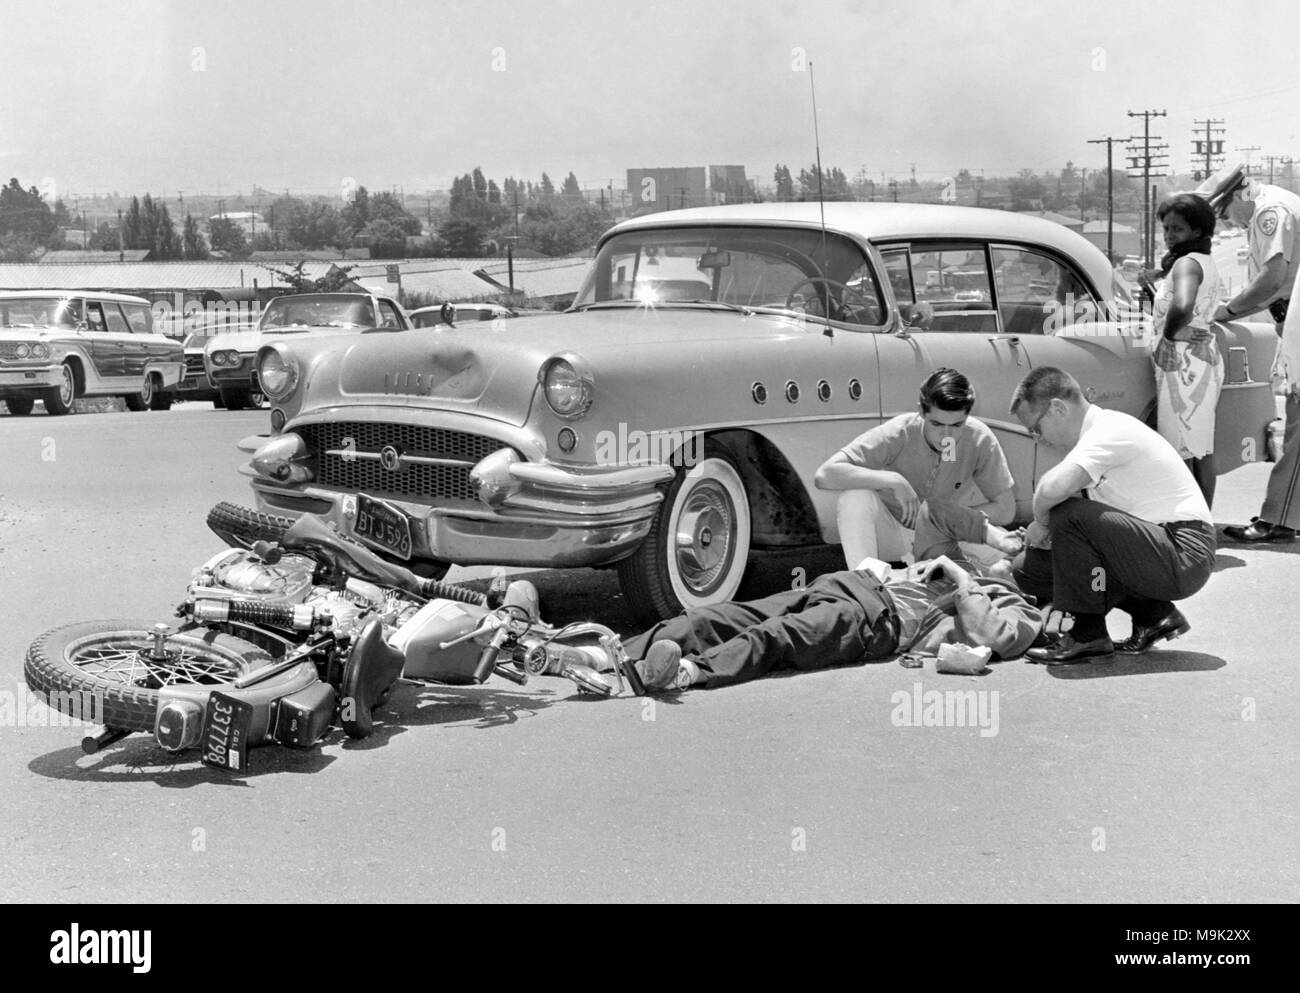 Car vs motorcycle accident in California, ca. 1964 Stock Photo - Alamy